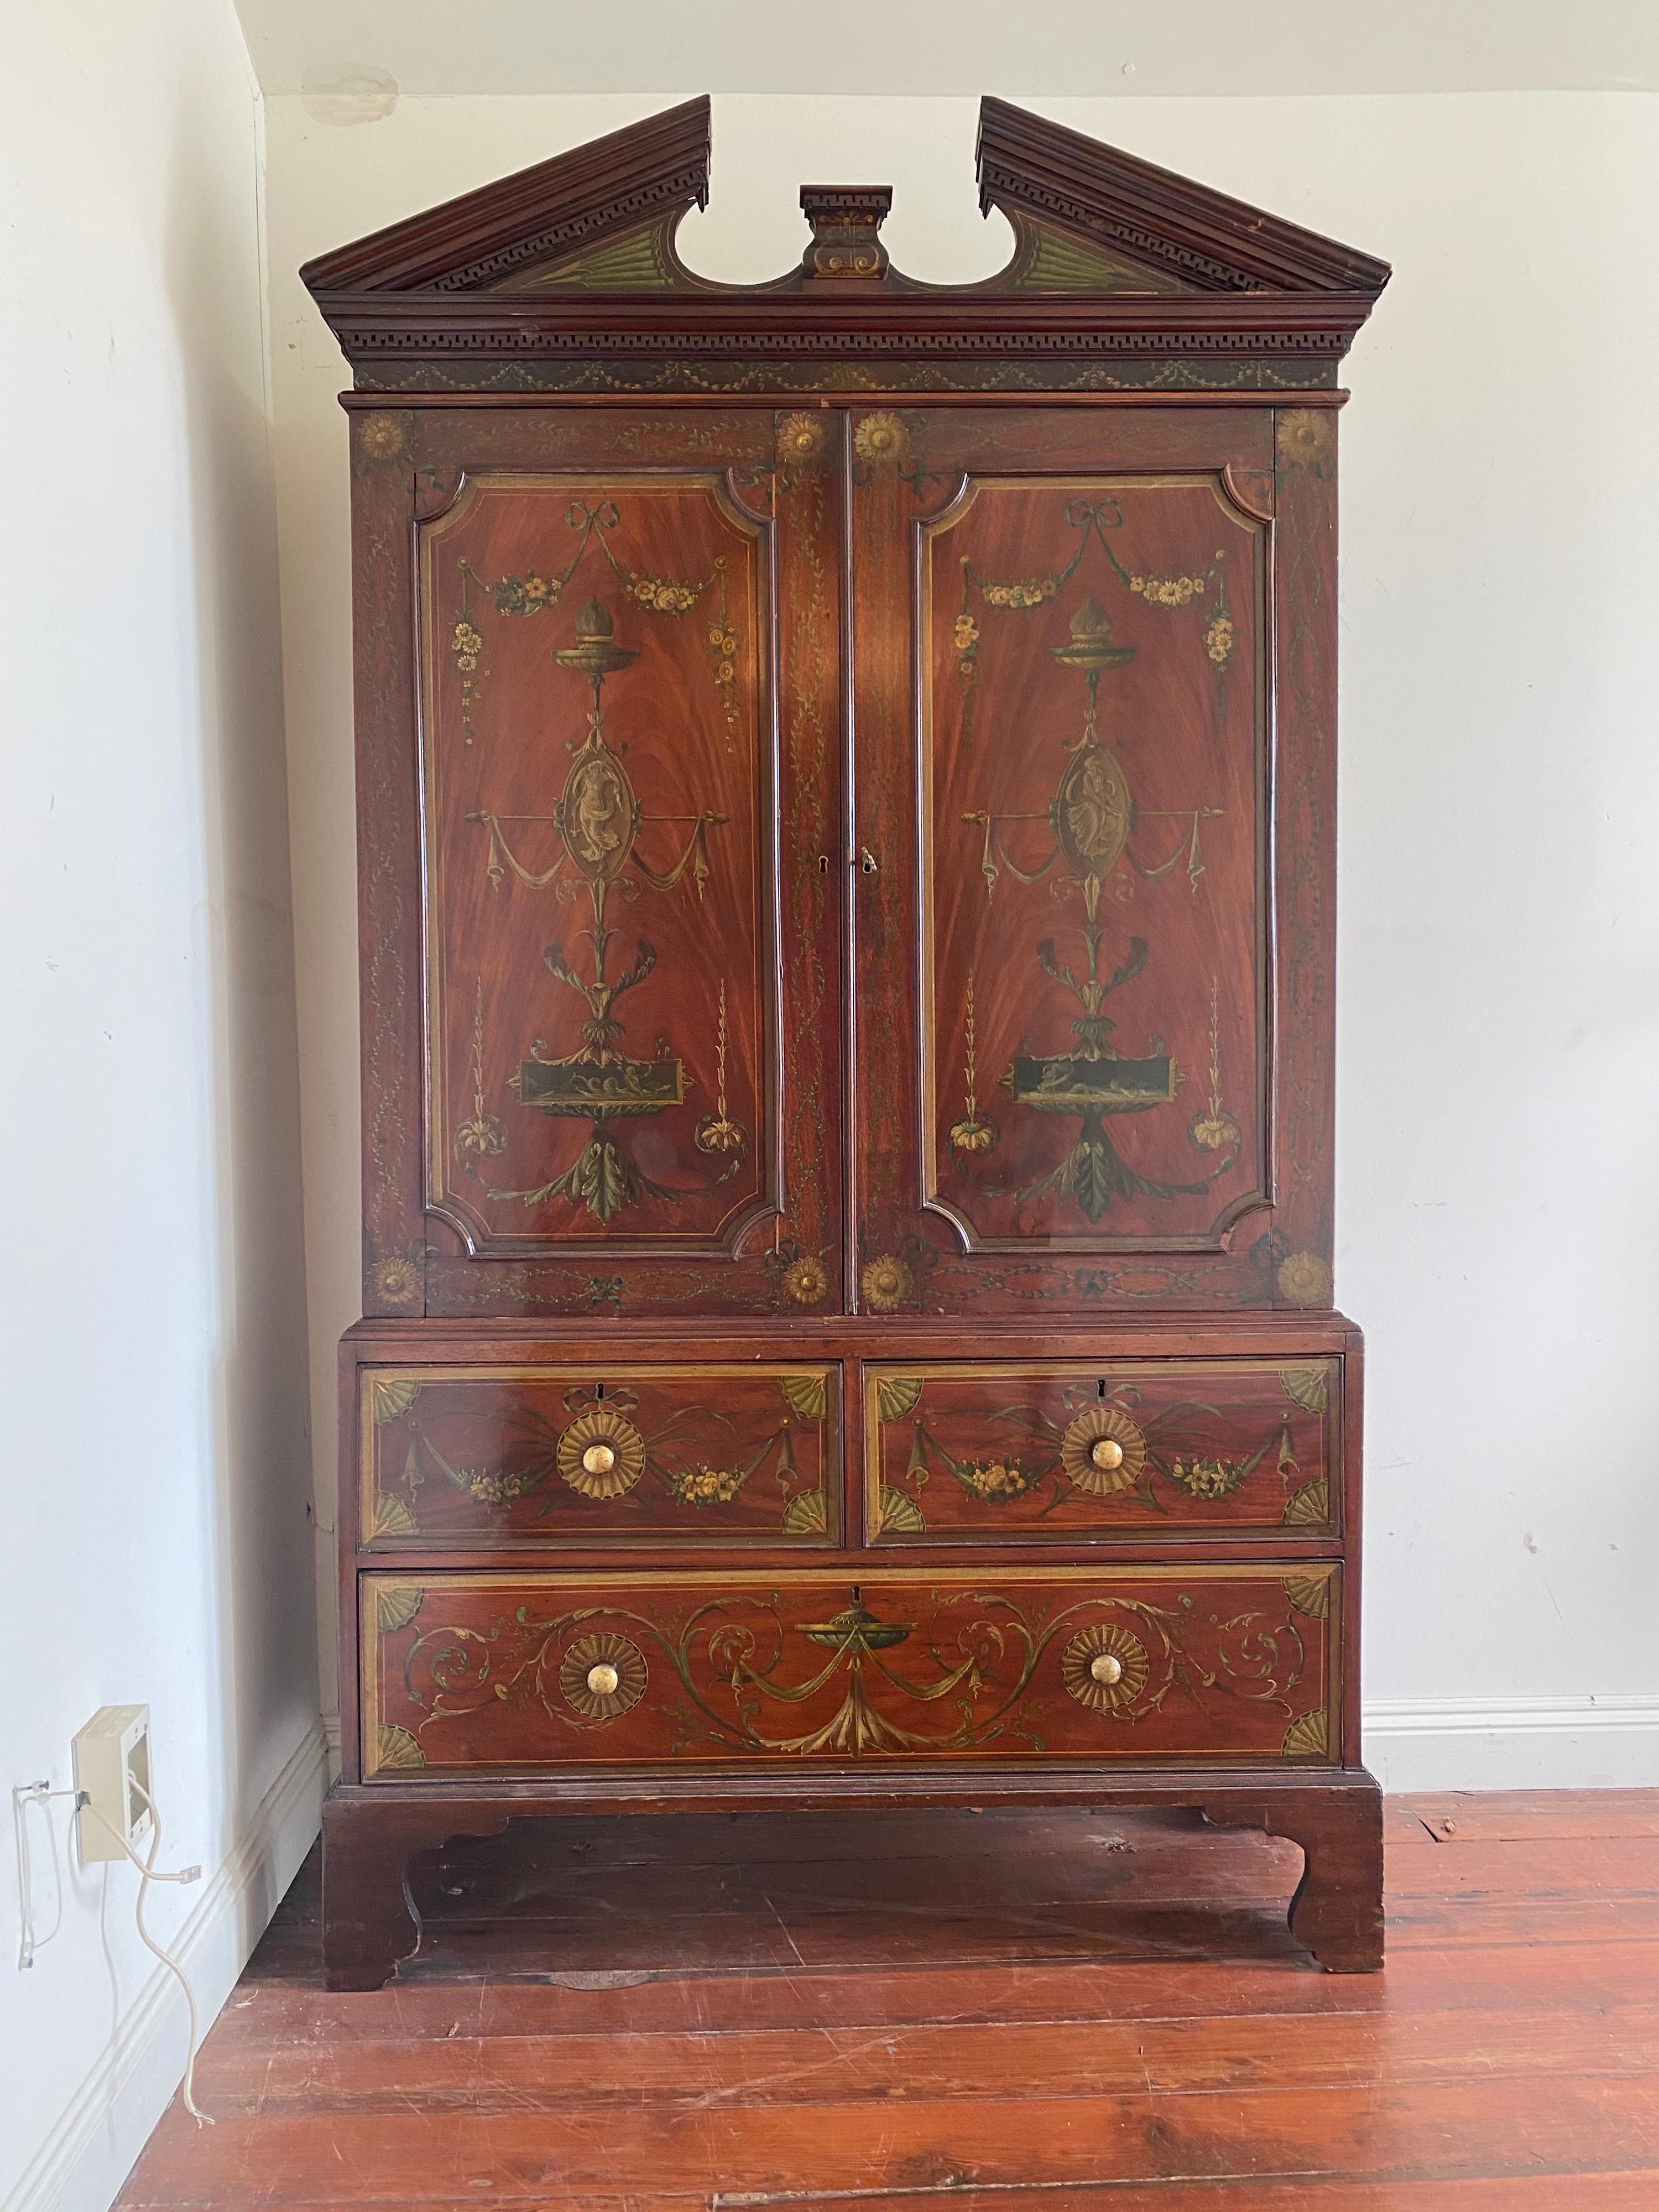 English Regency linen press with Adams style painted decoration. Two doors over two drawers. Broken pediment crown and ogre bracket feet. Silk lined on upper cabinet and paper lined drawers.